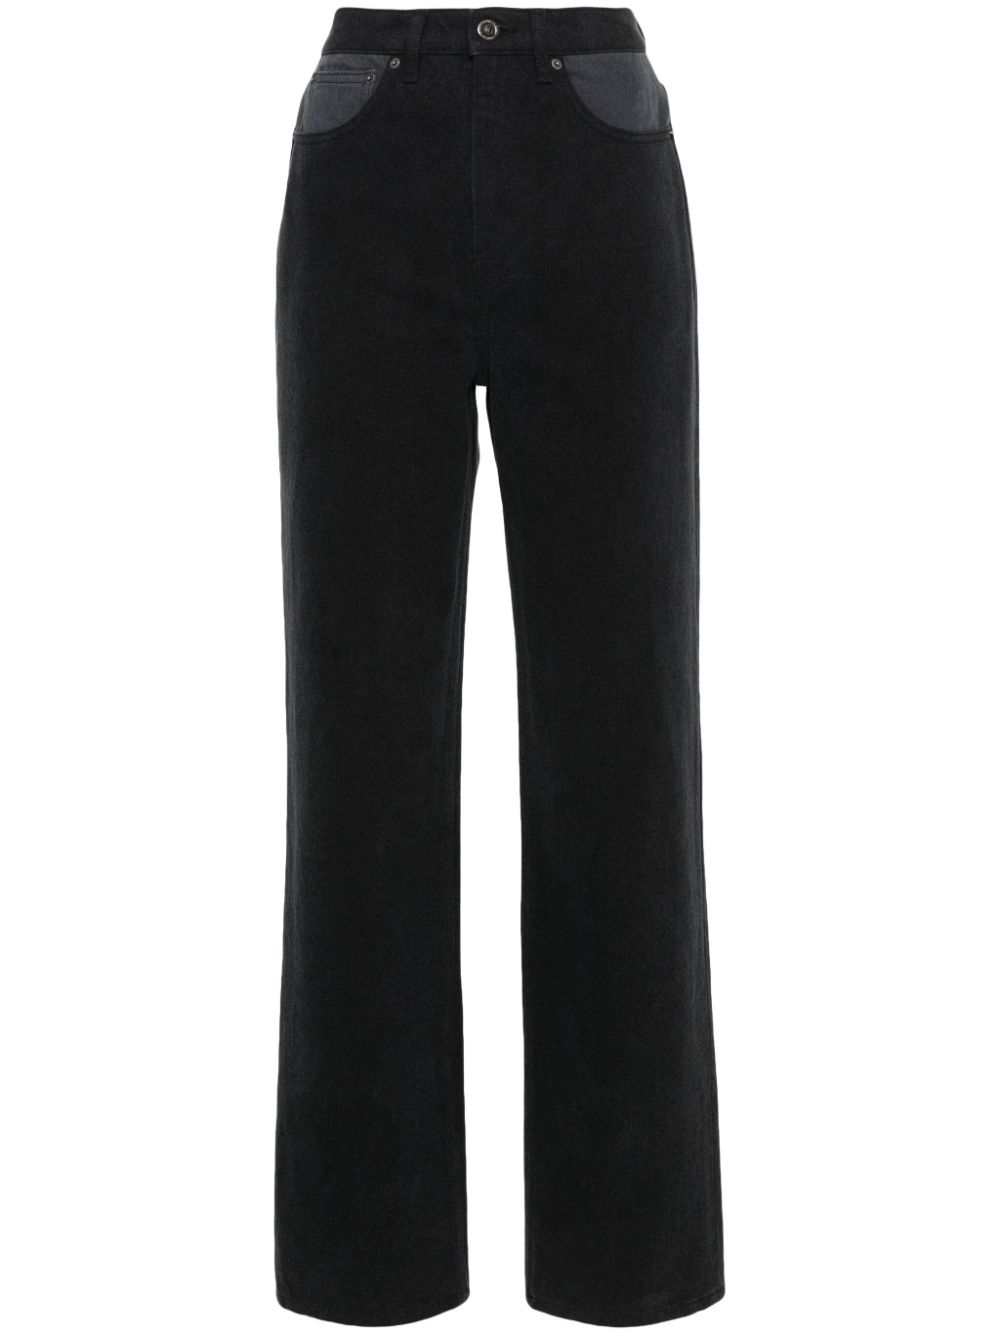 ROTATE BIRGER CHRISTENSEN two-tone tapered jeans - Black von ROTATE BIRGER CHRISTENSEN